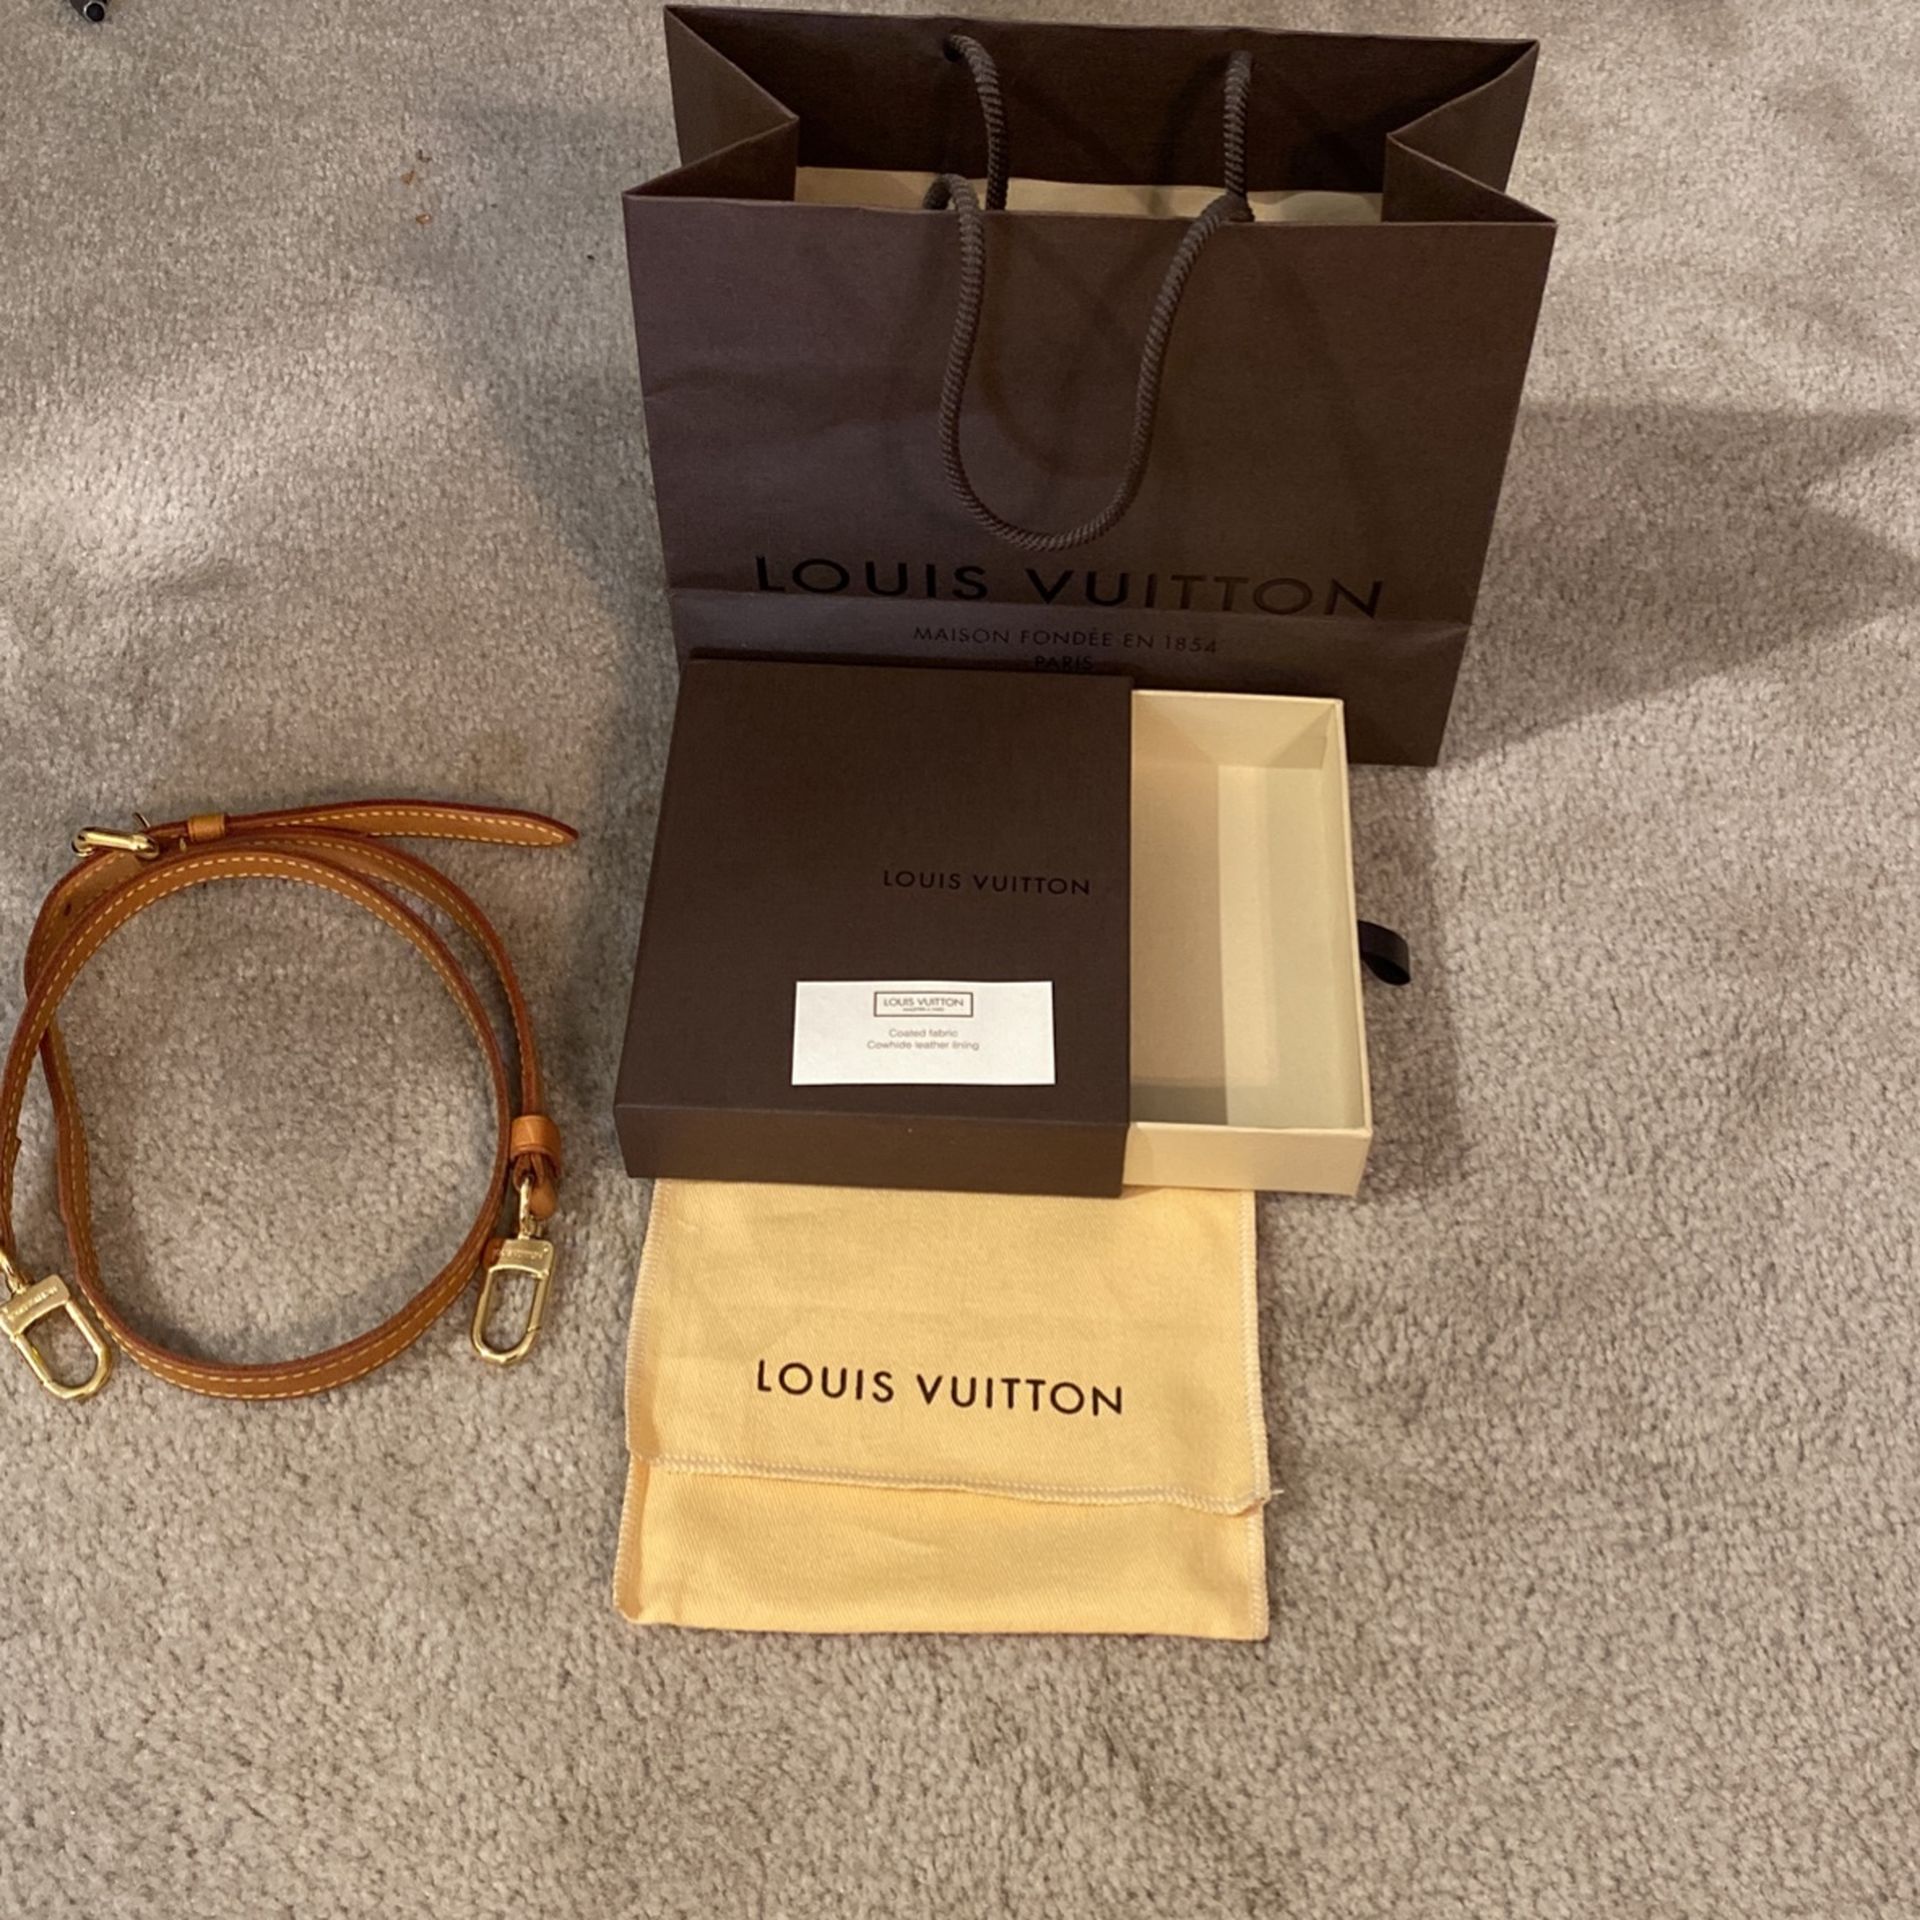 Authentic Louis Vuitton purse strap for Sale in Tomball, TX - OfferUp